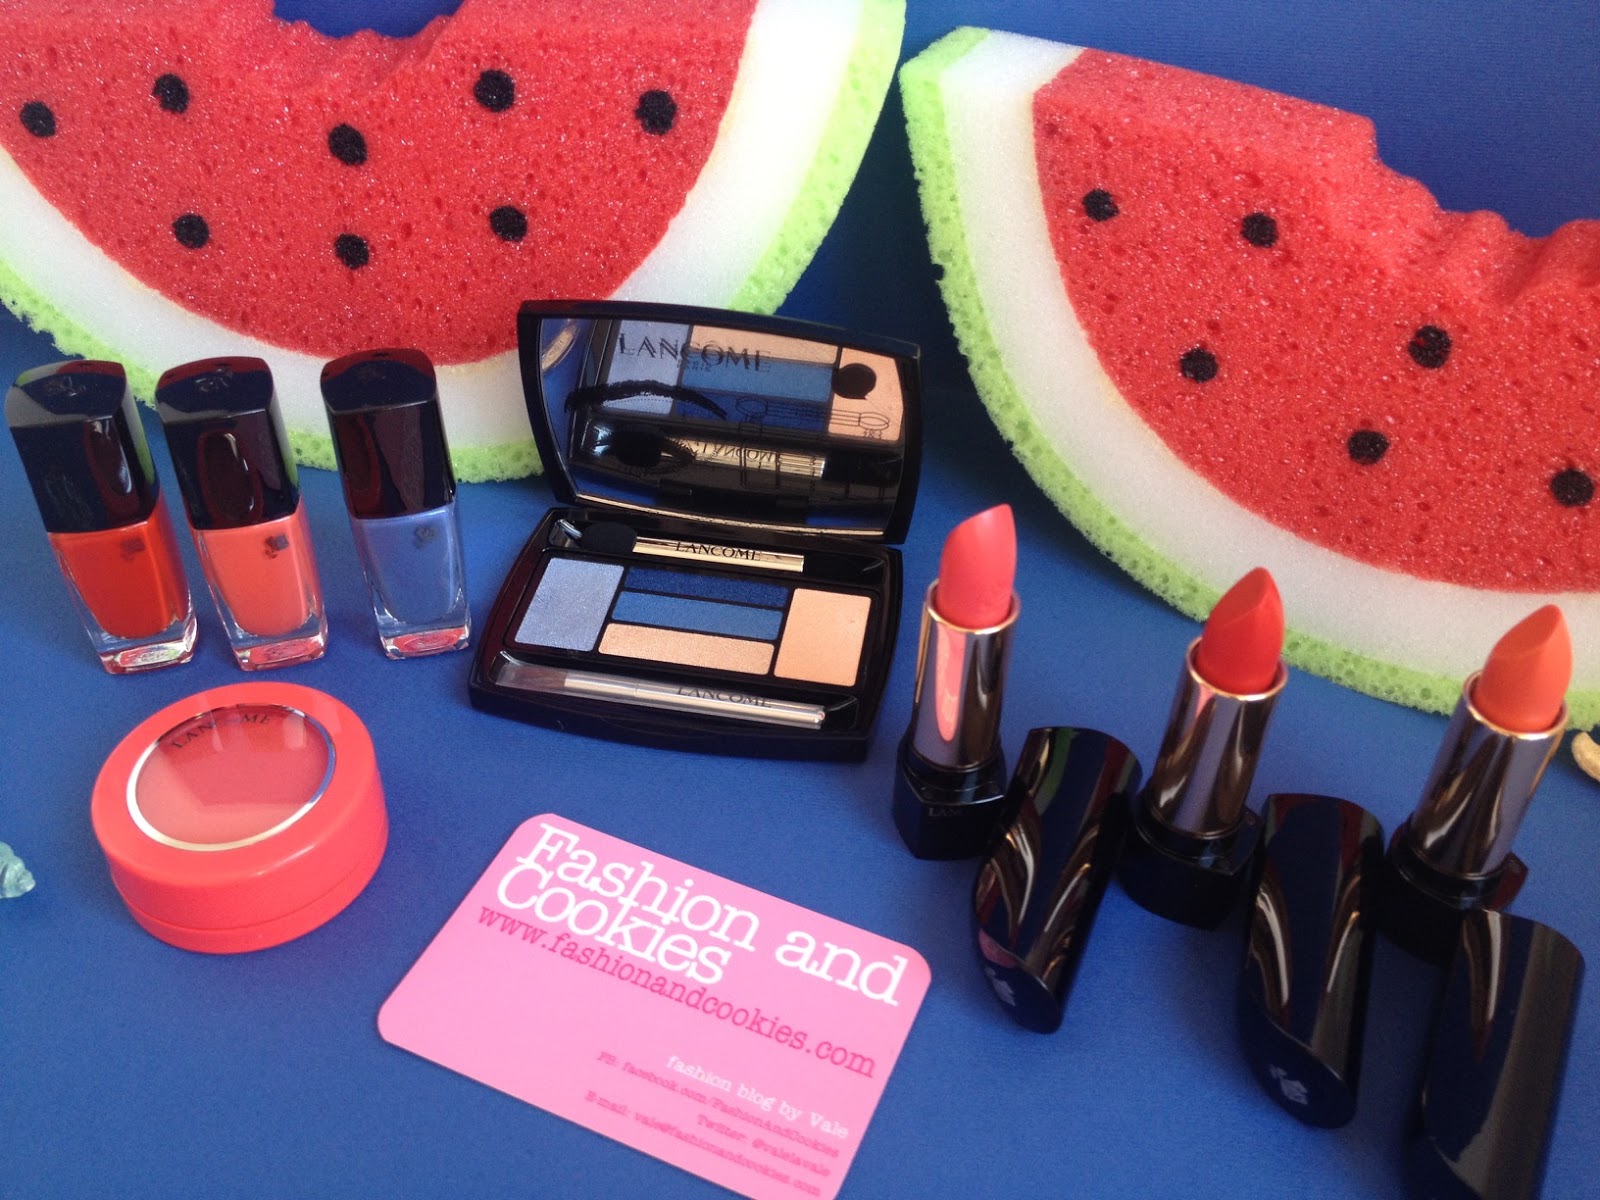 Lancome French Paradise makeup collection on Fashion and Cookies fashion blog, best makeup collection